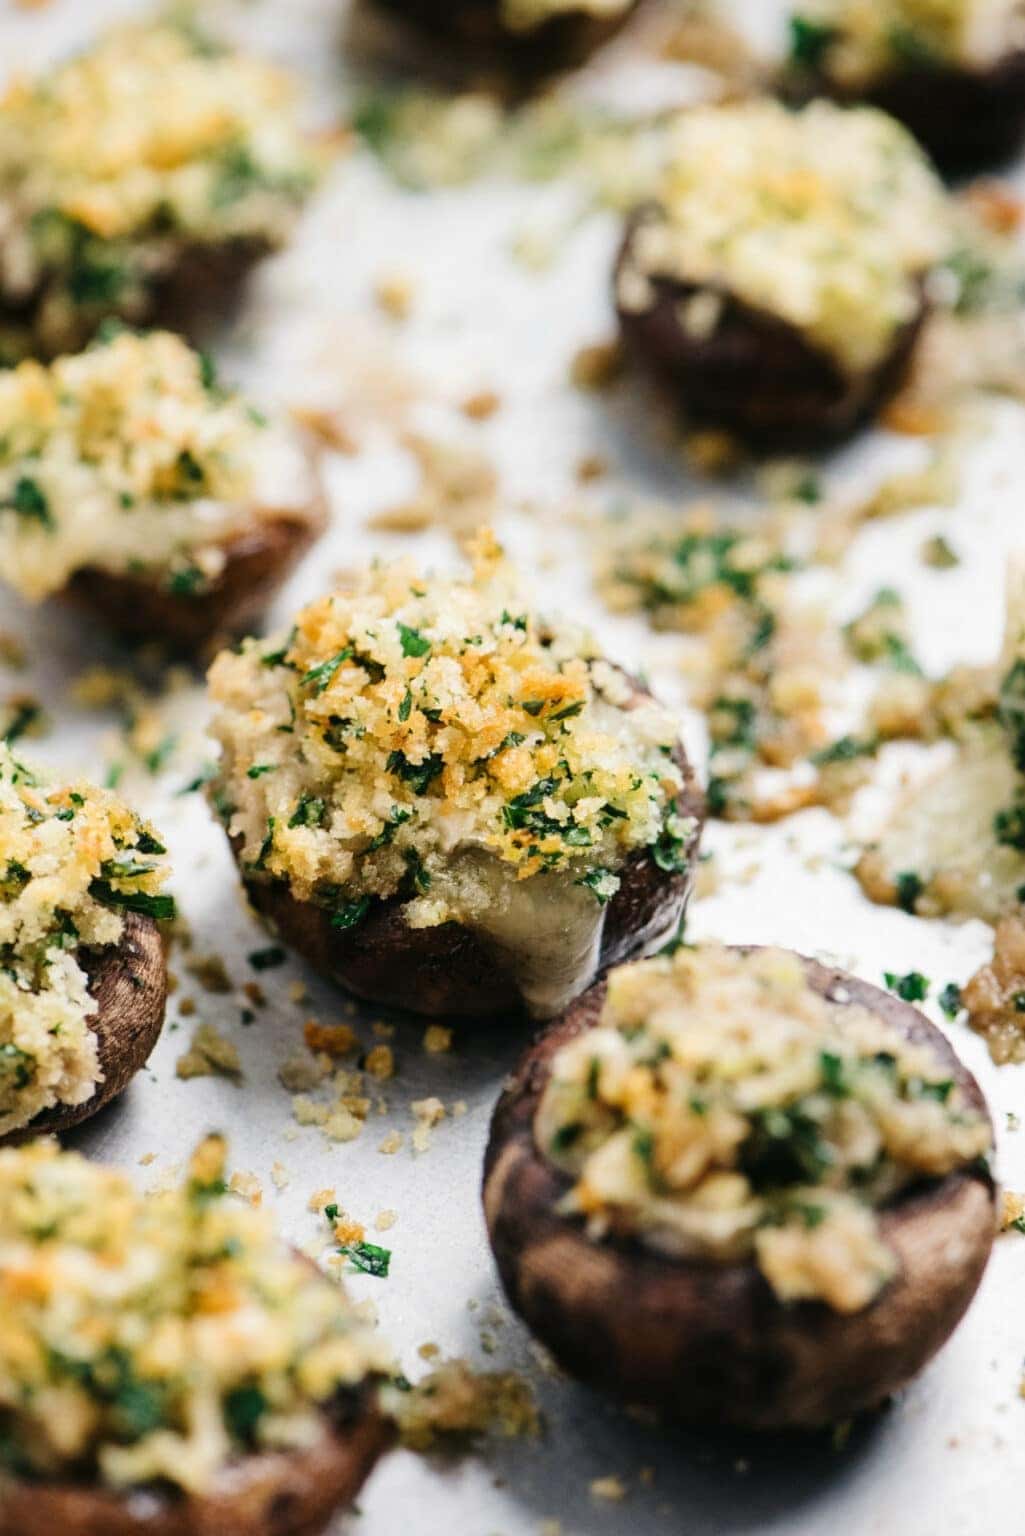 Brie stuffed mushroom with breadcrumbs topping.